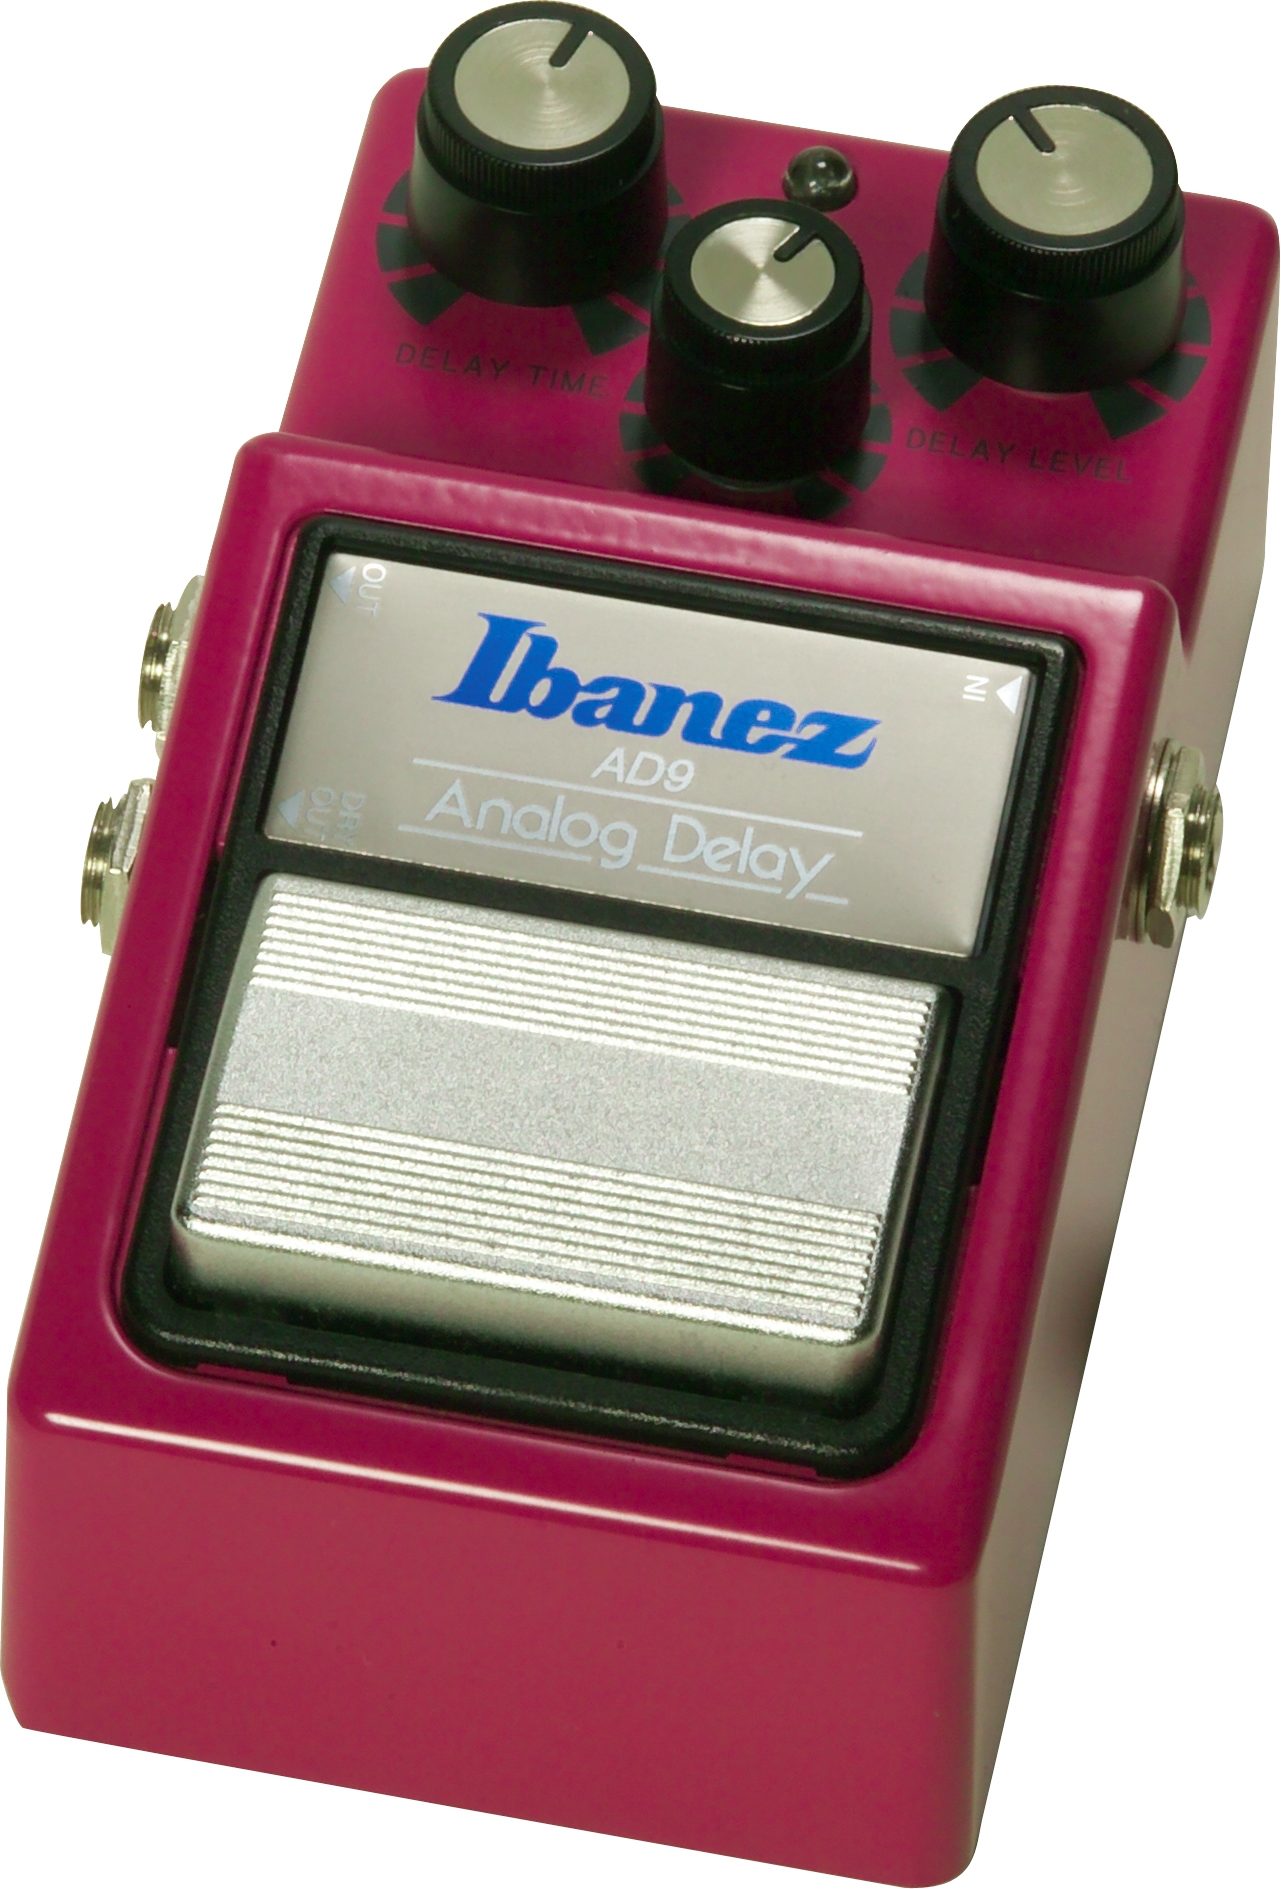 Ibanez AD9 Analog Delay Pedal | zZounds